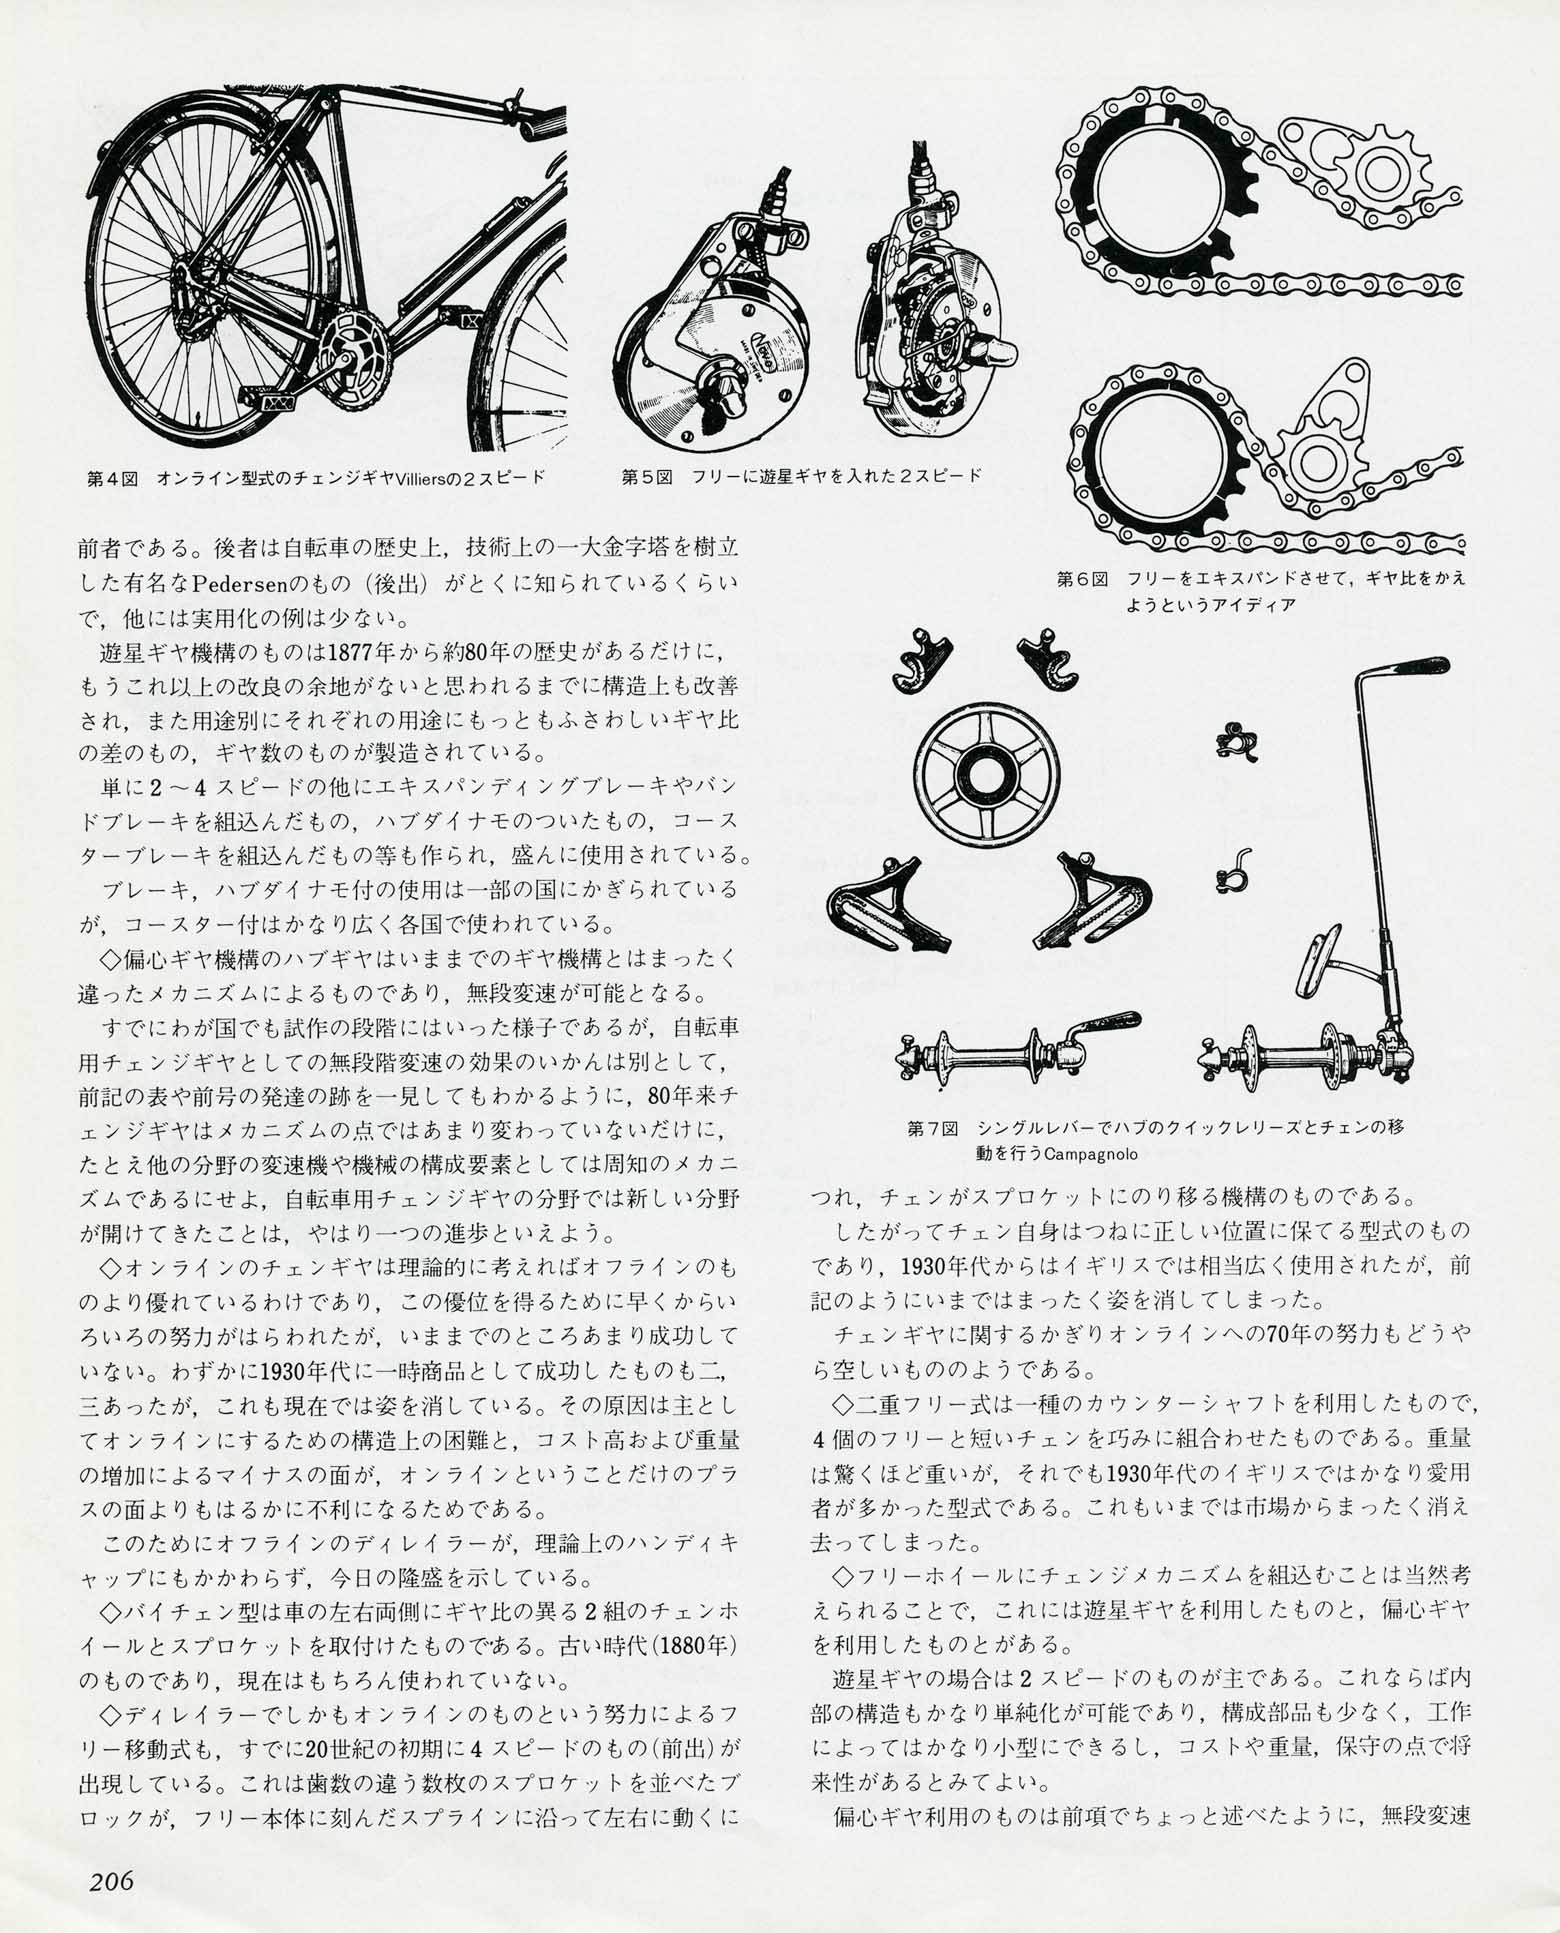 New Cycling May 1981 - Derailleur Collection page 206 main image